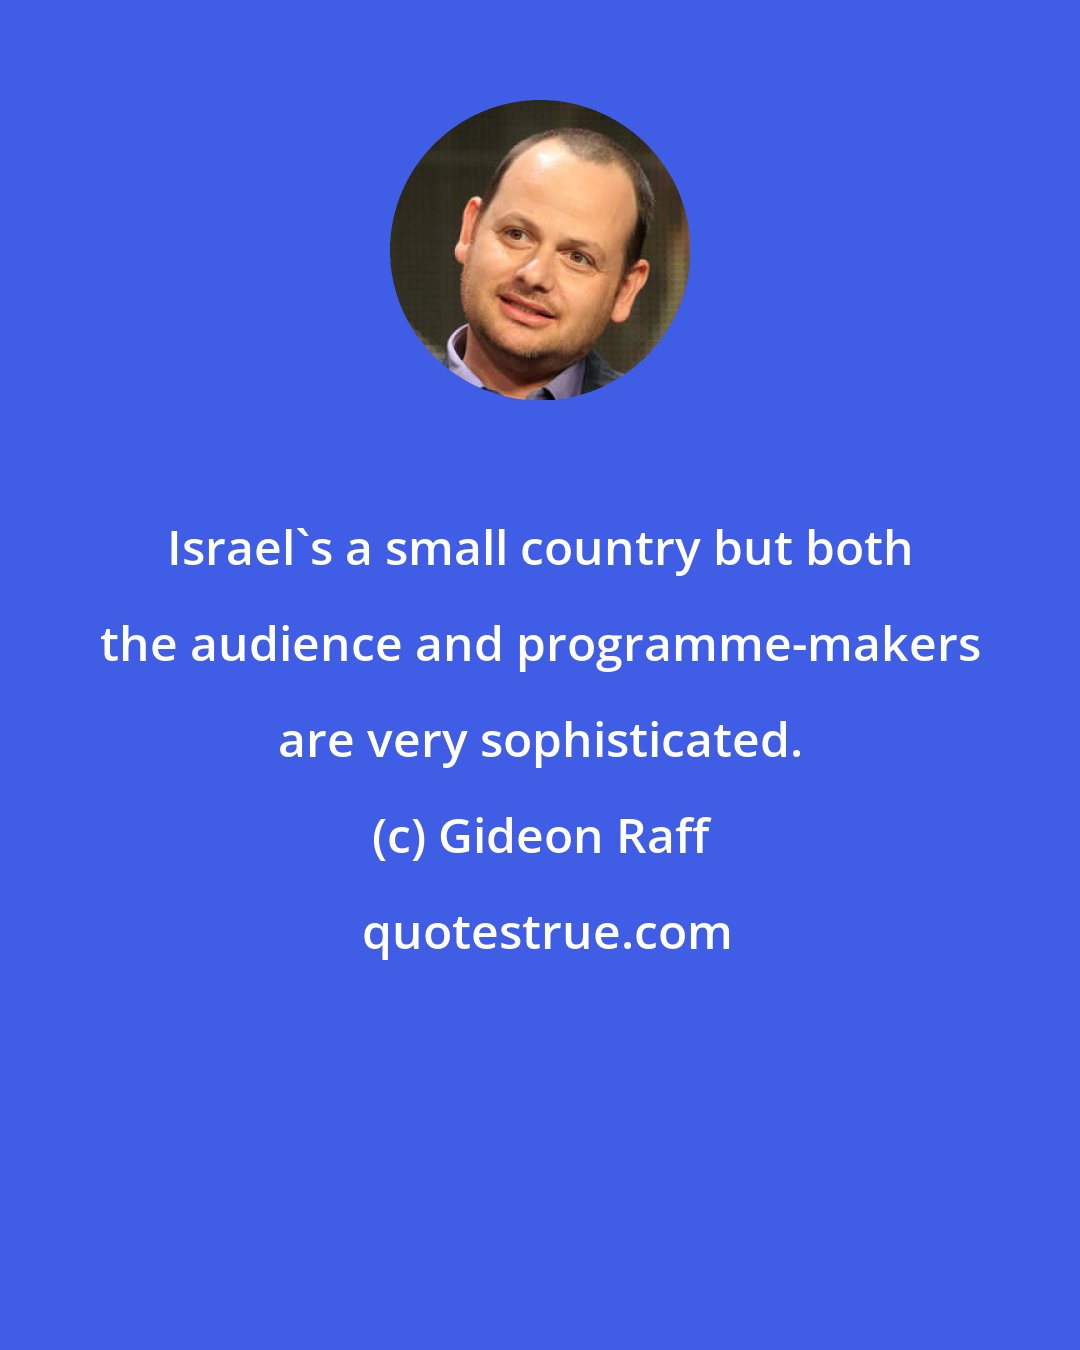 Gideon Raff: Israel's a small country but both the audience and programme-makers are very sophisticated.